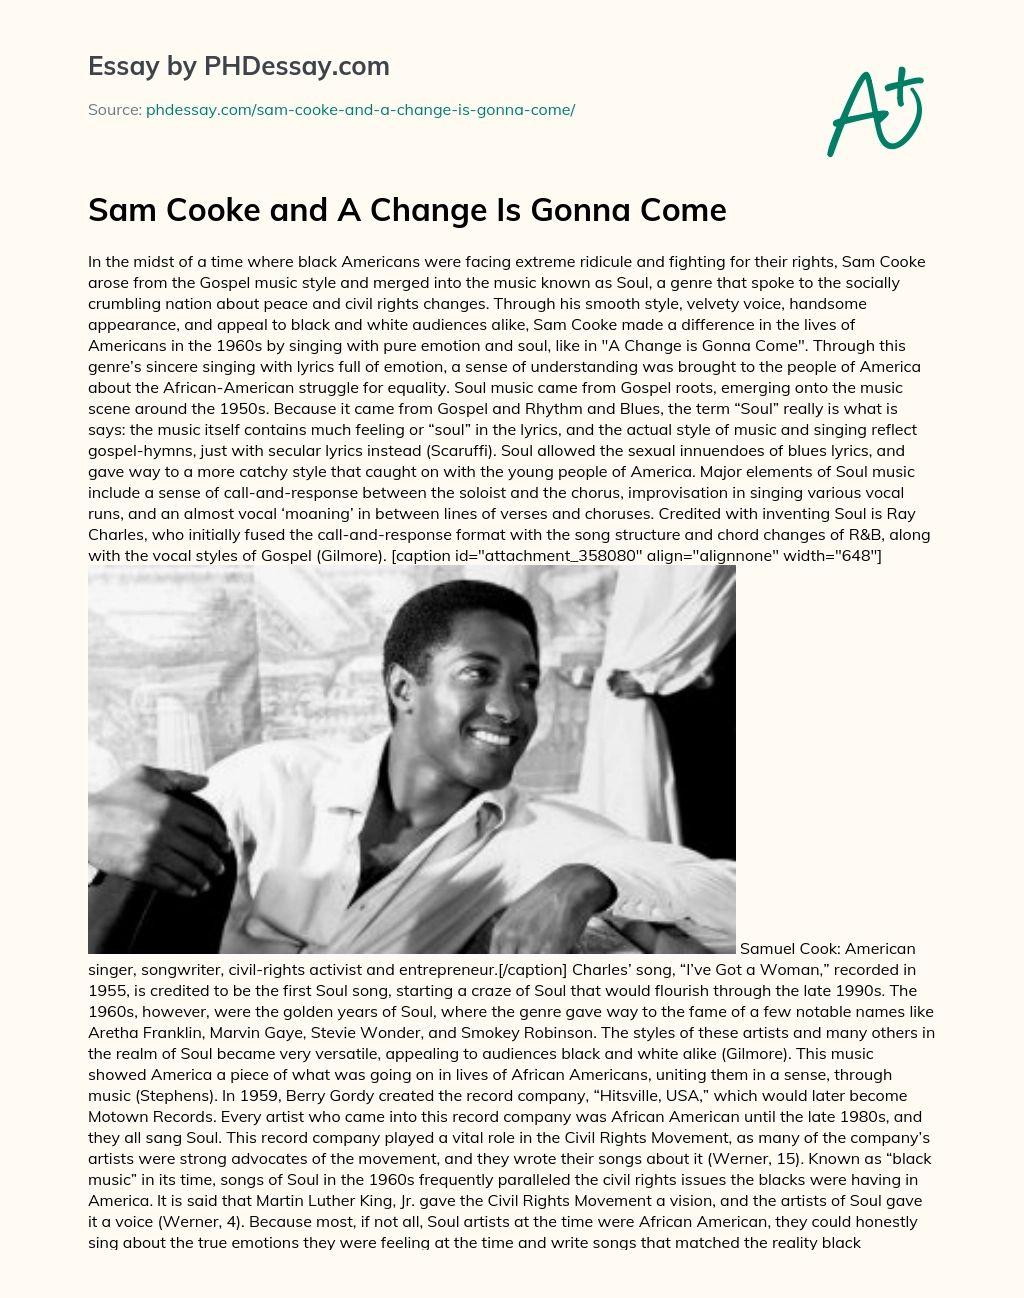 Sam Cooke and A Change Is Gonna Come essay